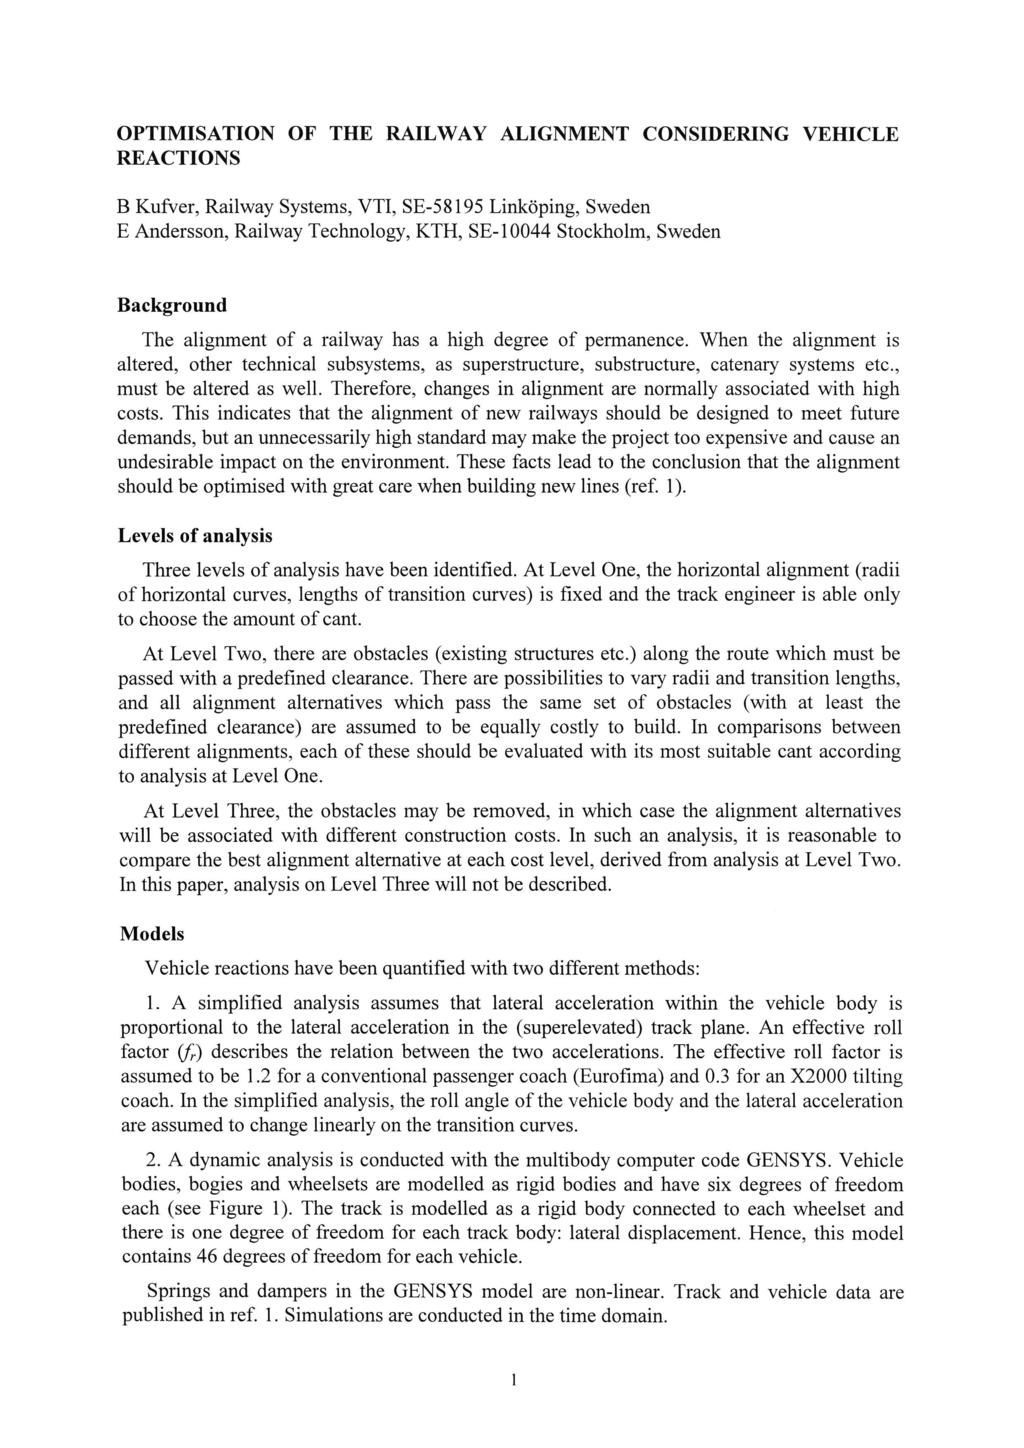 OPTIMISATION OF THE RAILWAY ALIGNMENT CONSIDERING VEHICLE REACTIONS B Kufver, Railway Systems, VTI, SE-58l95 Linköping, Sweden E Andersson, Railway Technology, KTH, SE-10044 Stockholm, Sweden